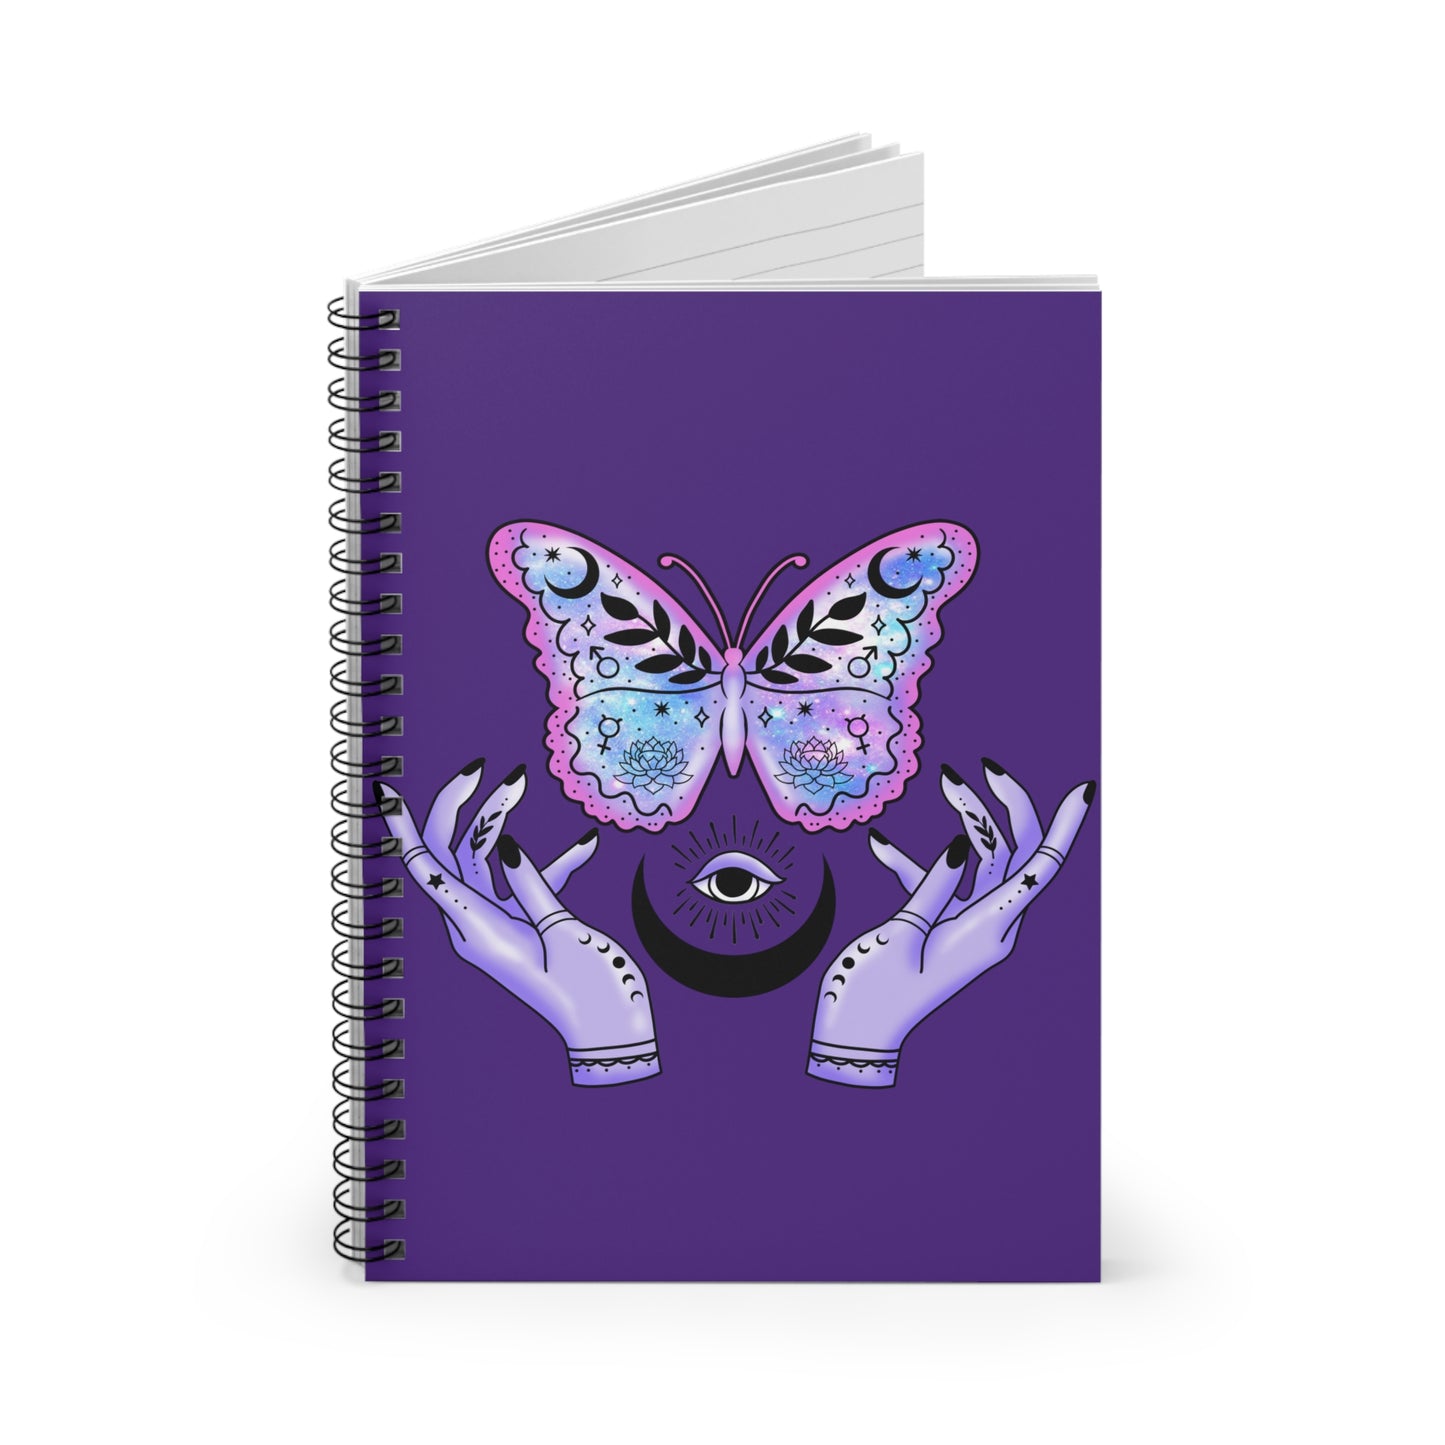 Mystical Magic: Spiral Notebook - Log Books - Journals - Diaries - and More Custom Printed by TheGlassyLass